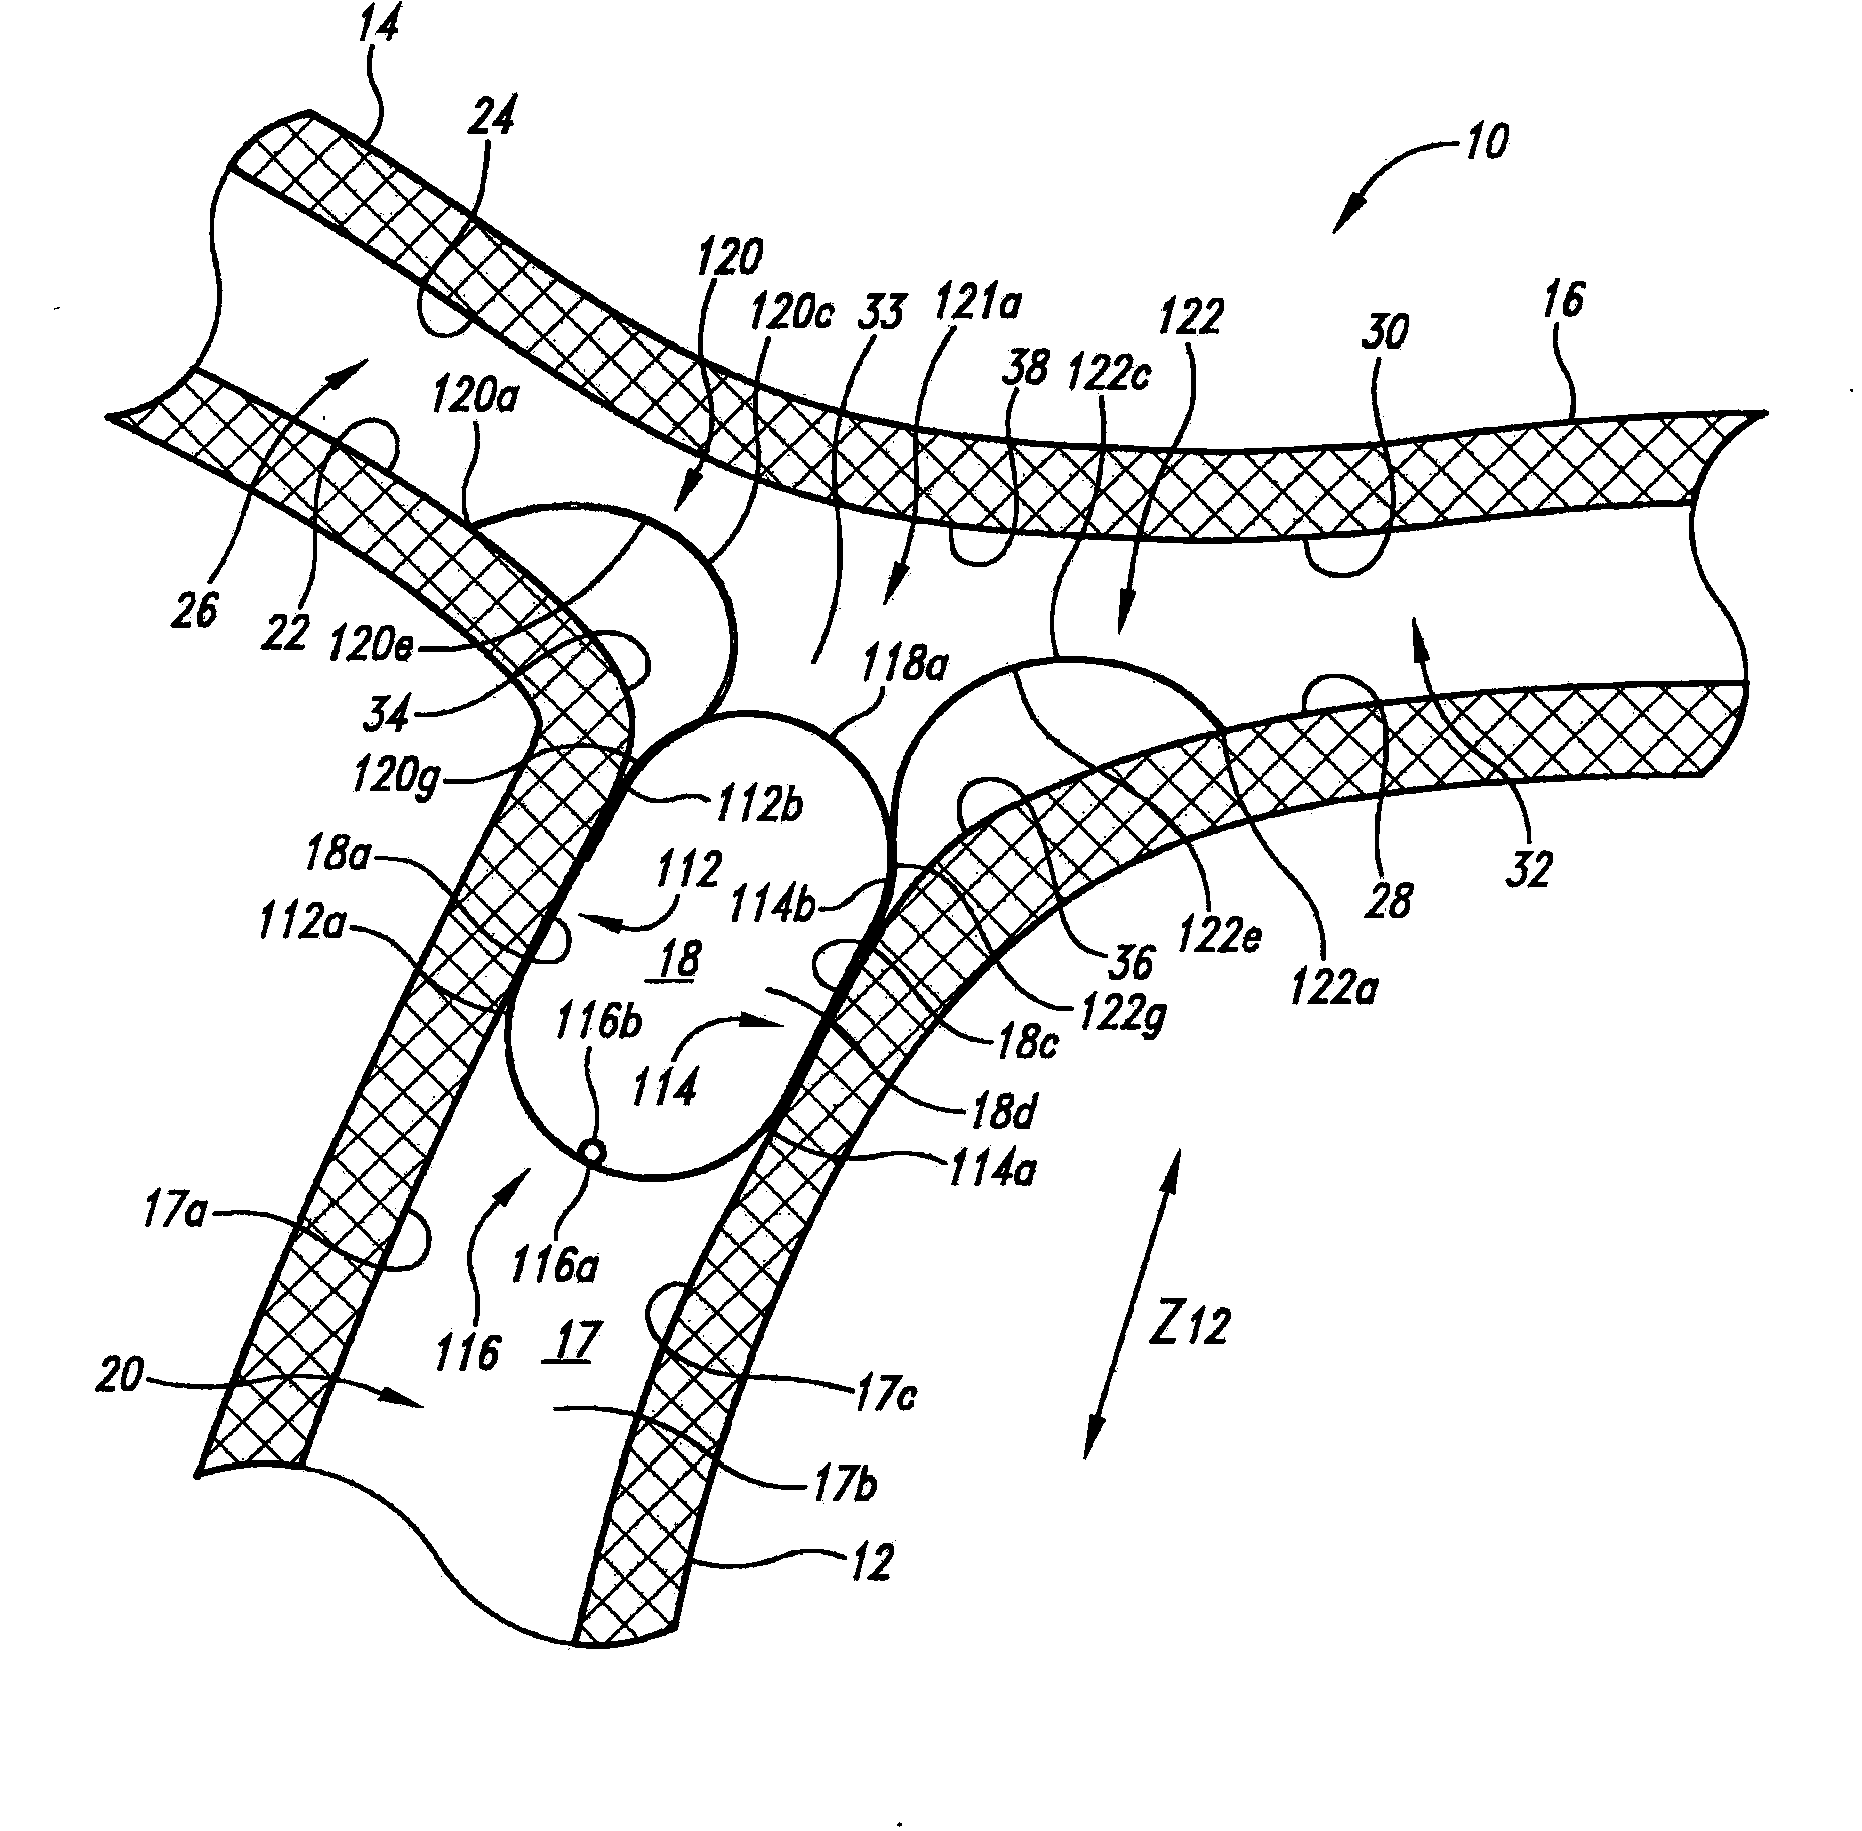 Vascular anchor positioning system and method